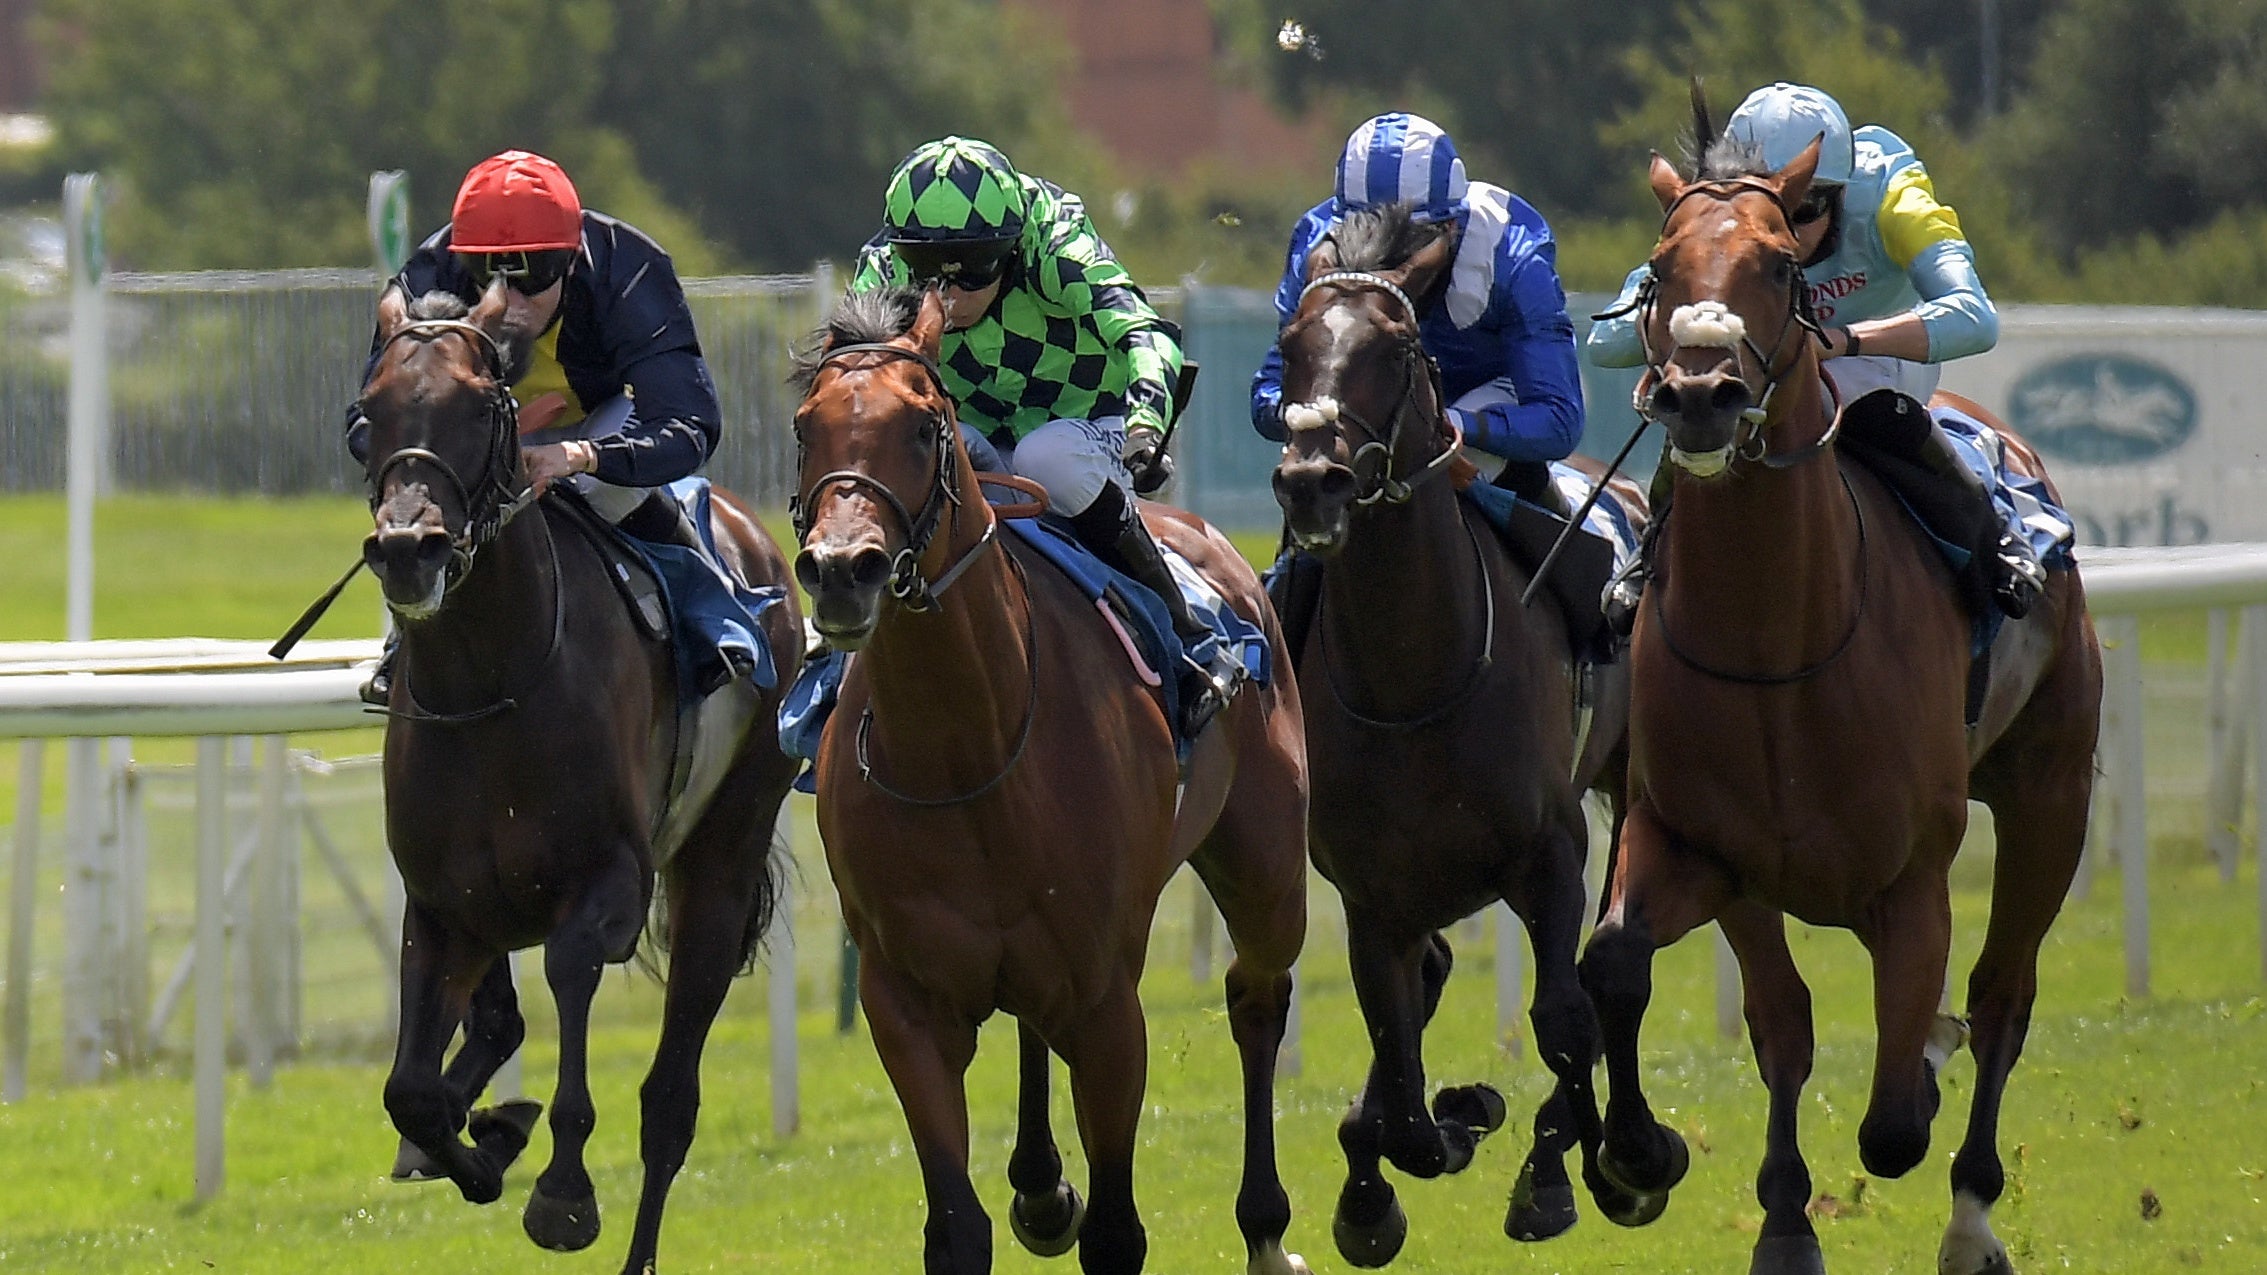 Brentford Hope (left) could be heading to Redcar for the Zetland Gold Cup